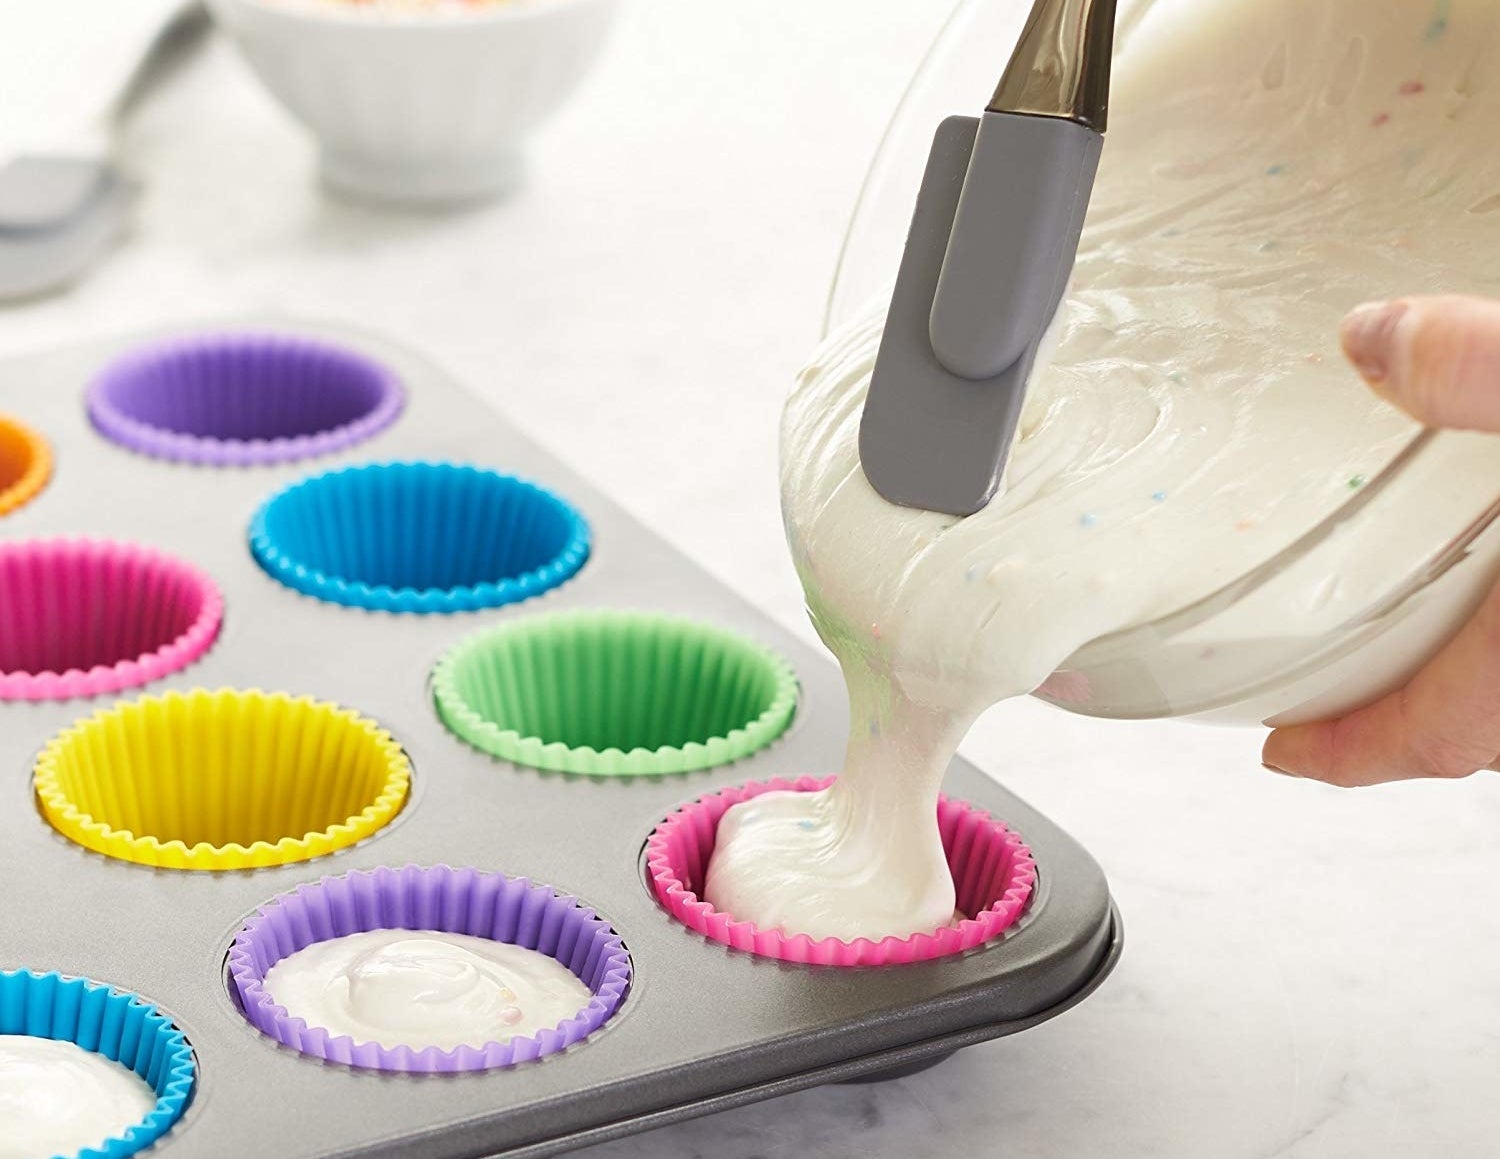 A person pouring batter into the colorful silicone baking cups